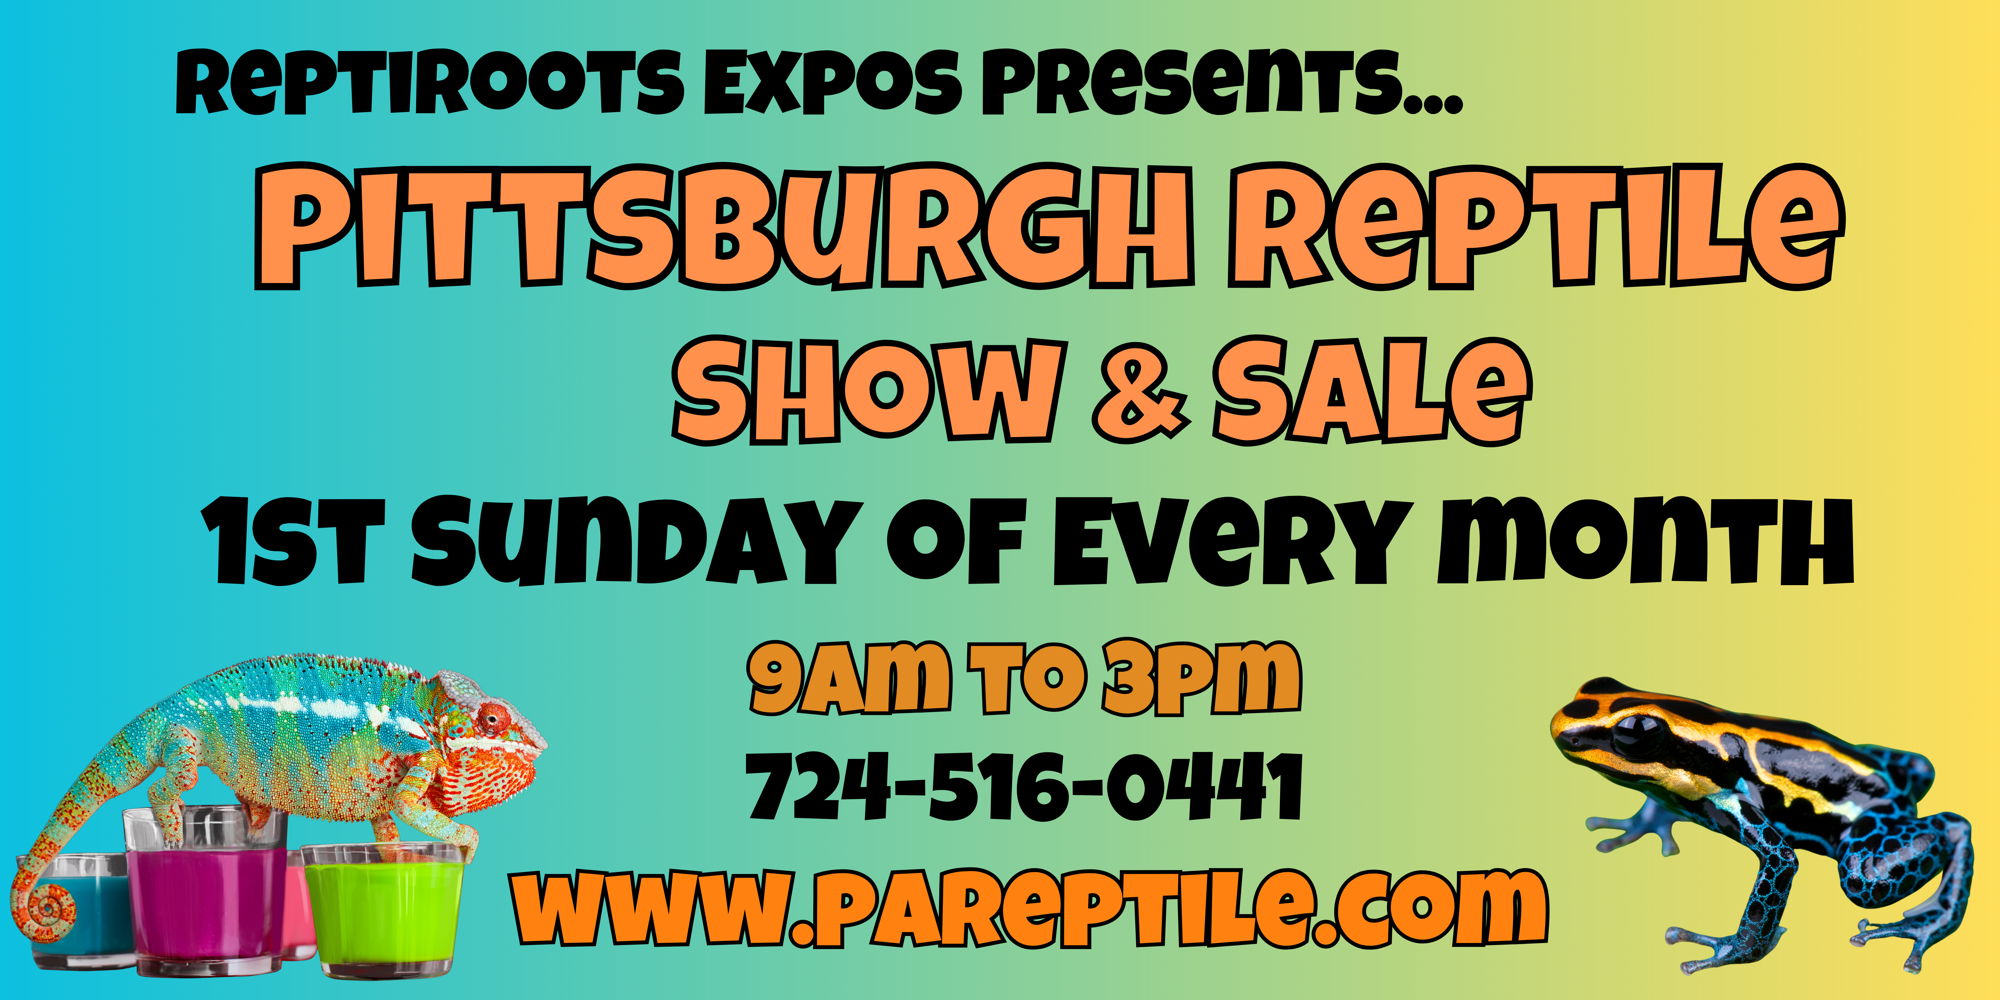 Pittsburgh Reptile Show & Sale April 7th promotional image